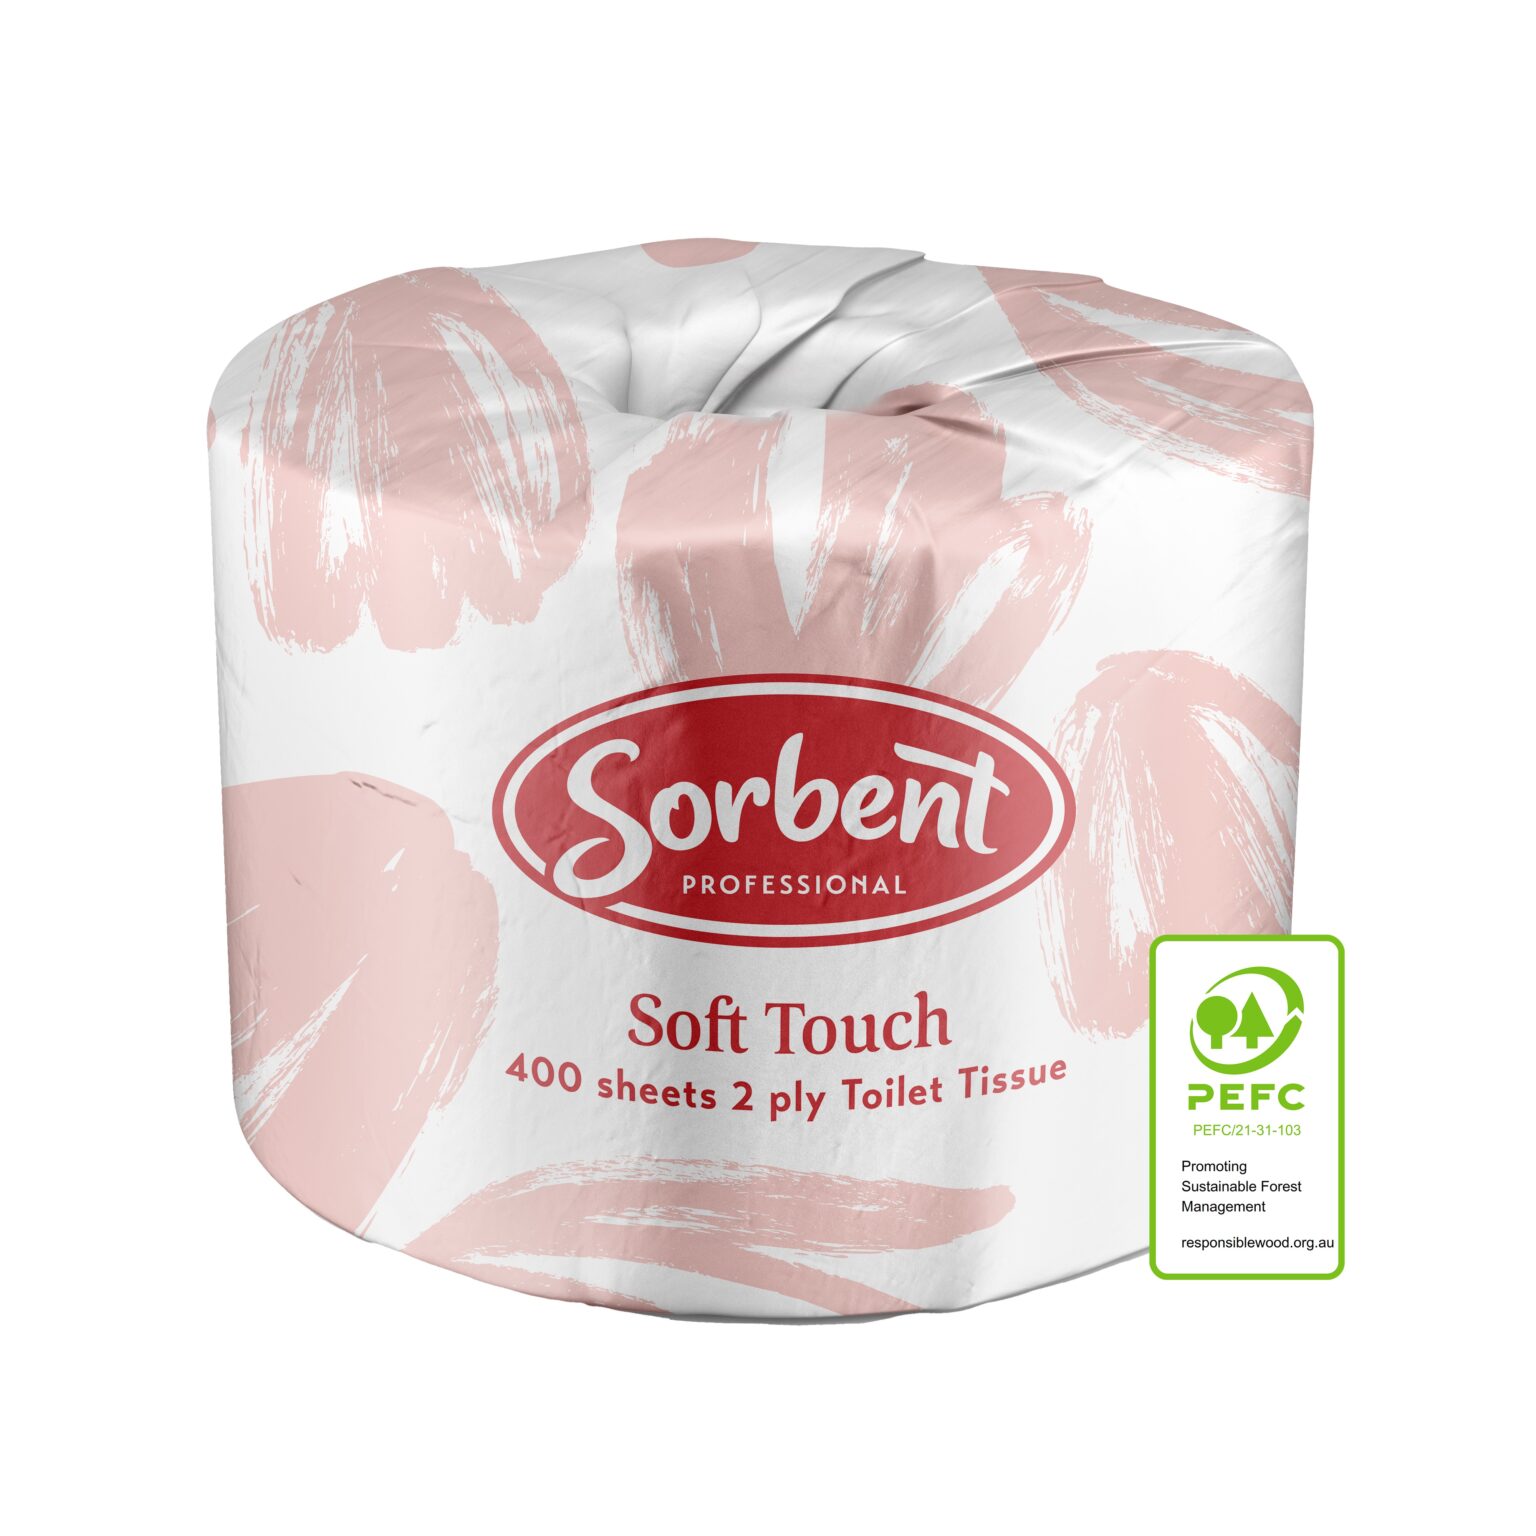 25003_SorbentProfessional_SoftTouch Toilet Tissue 2ply 400s_PEFC